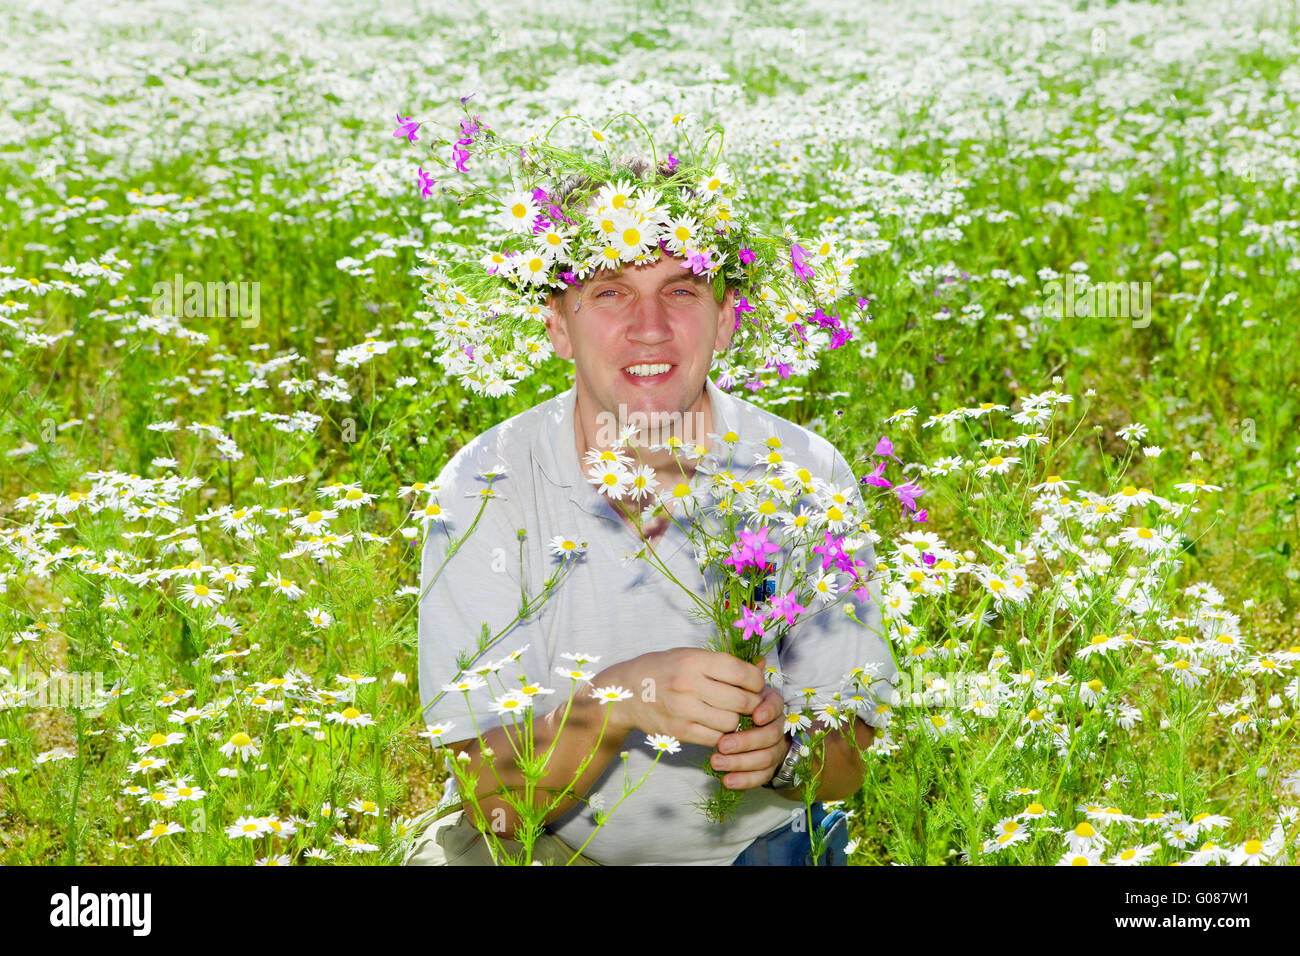 The smiling man in a wreath from wild flowers Stock Photo